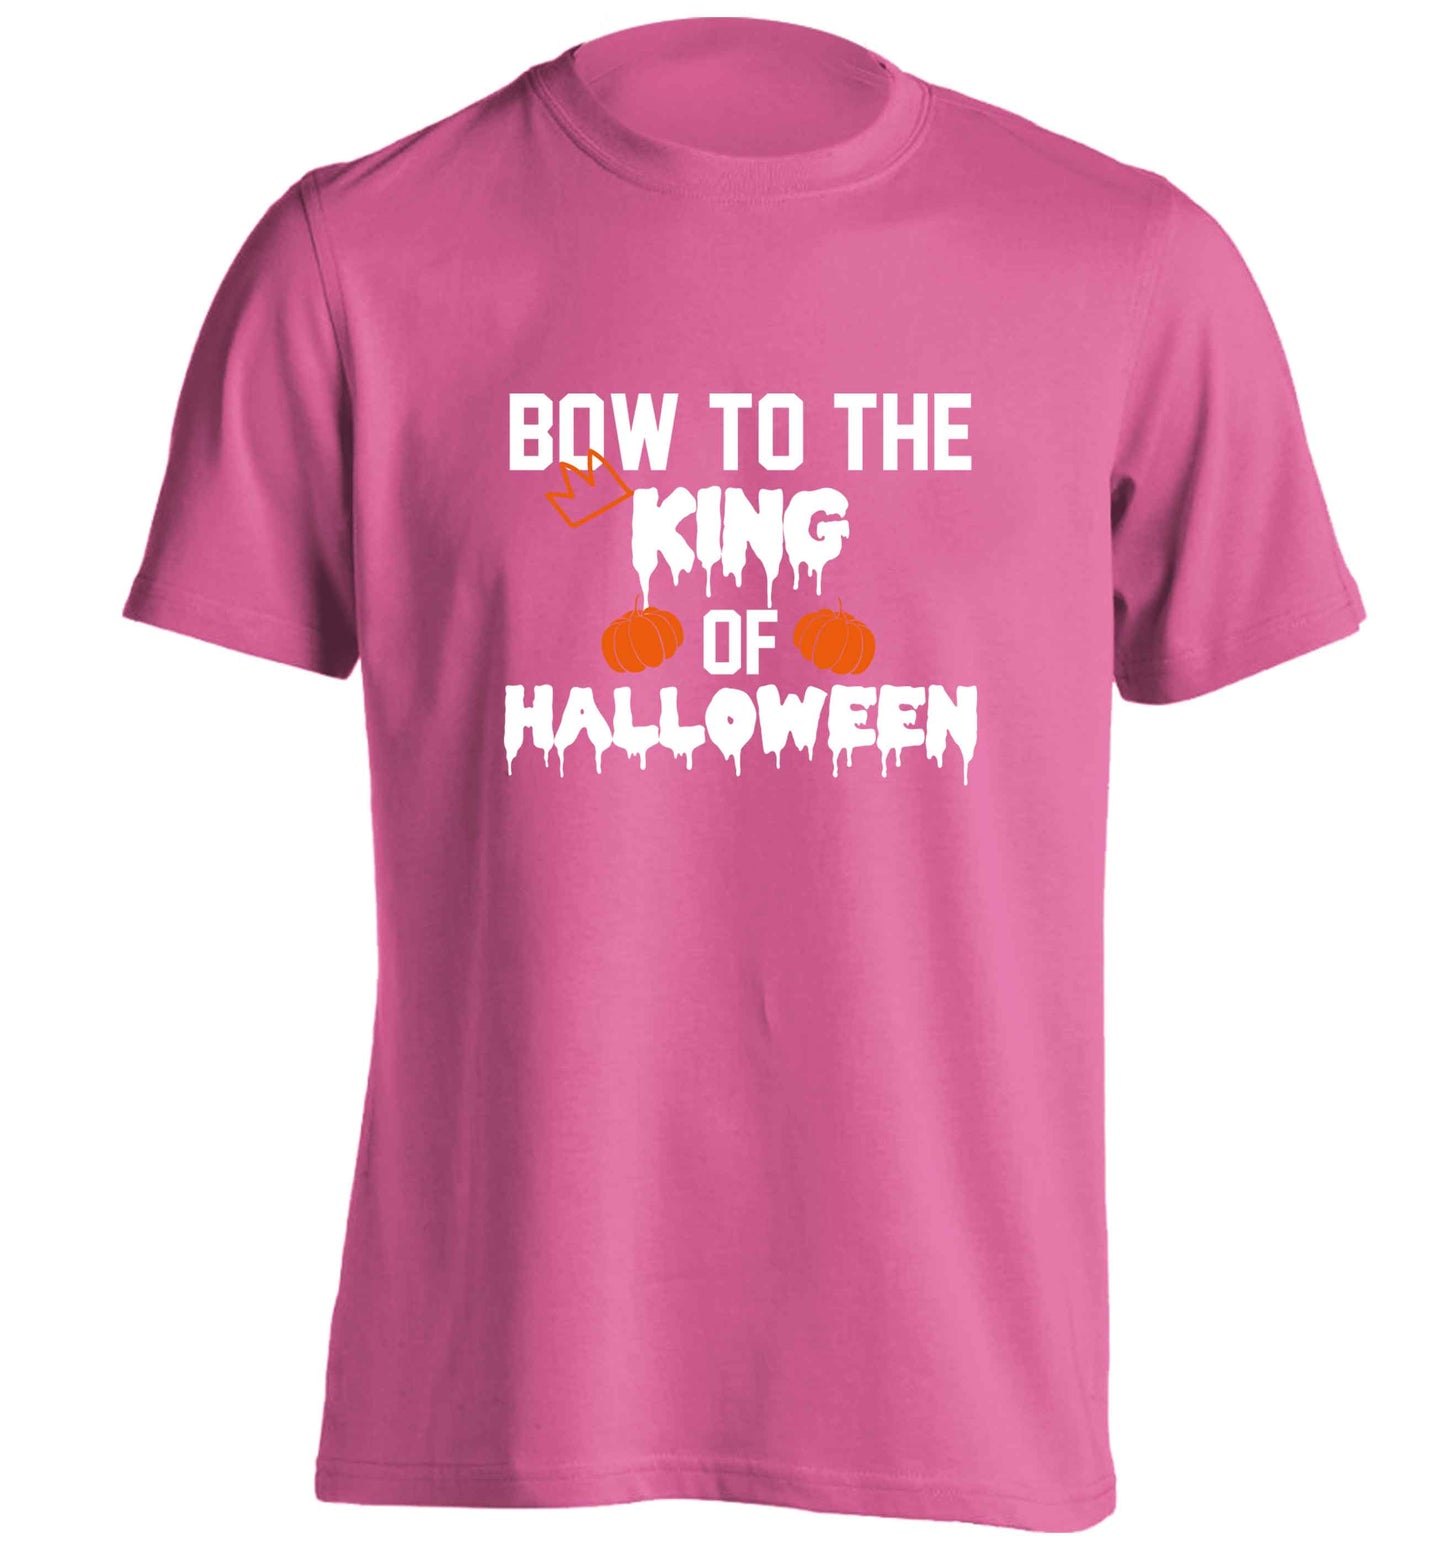 Bow to the King of halloween adults unisex pink Tshirt 2XL